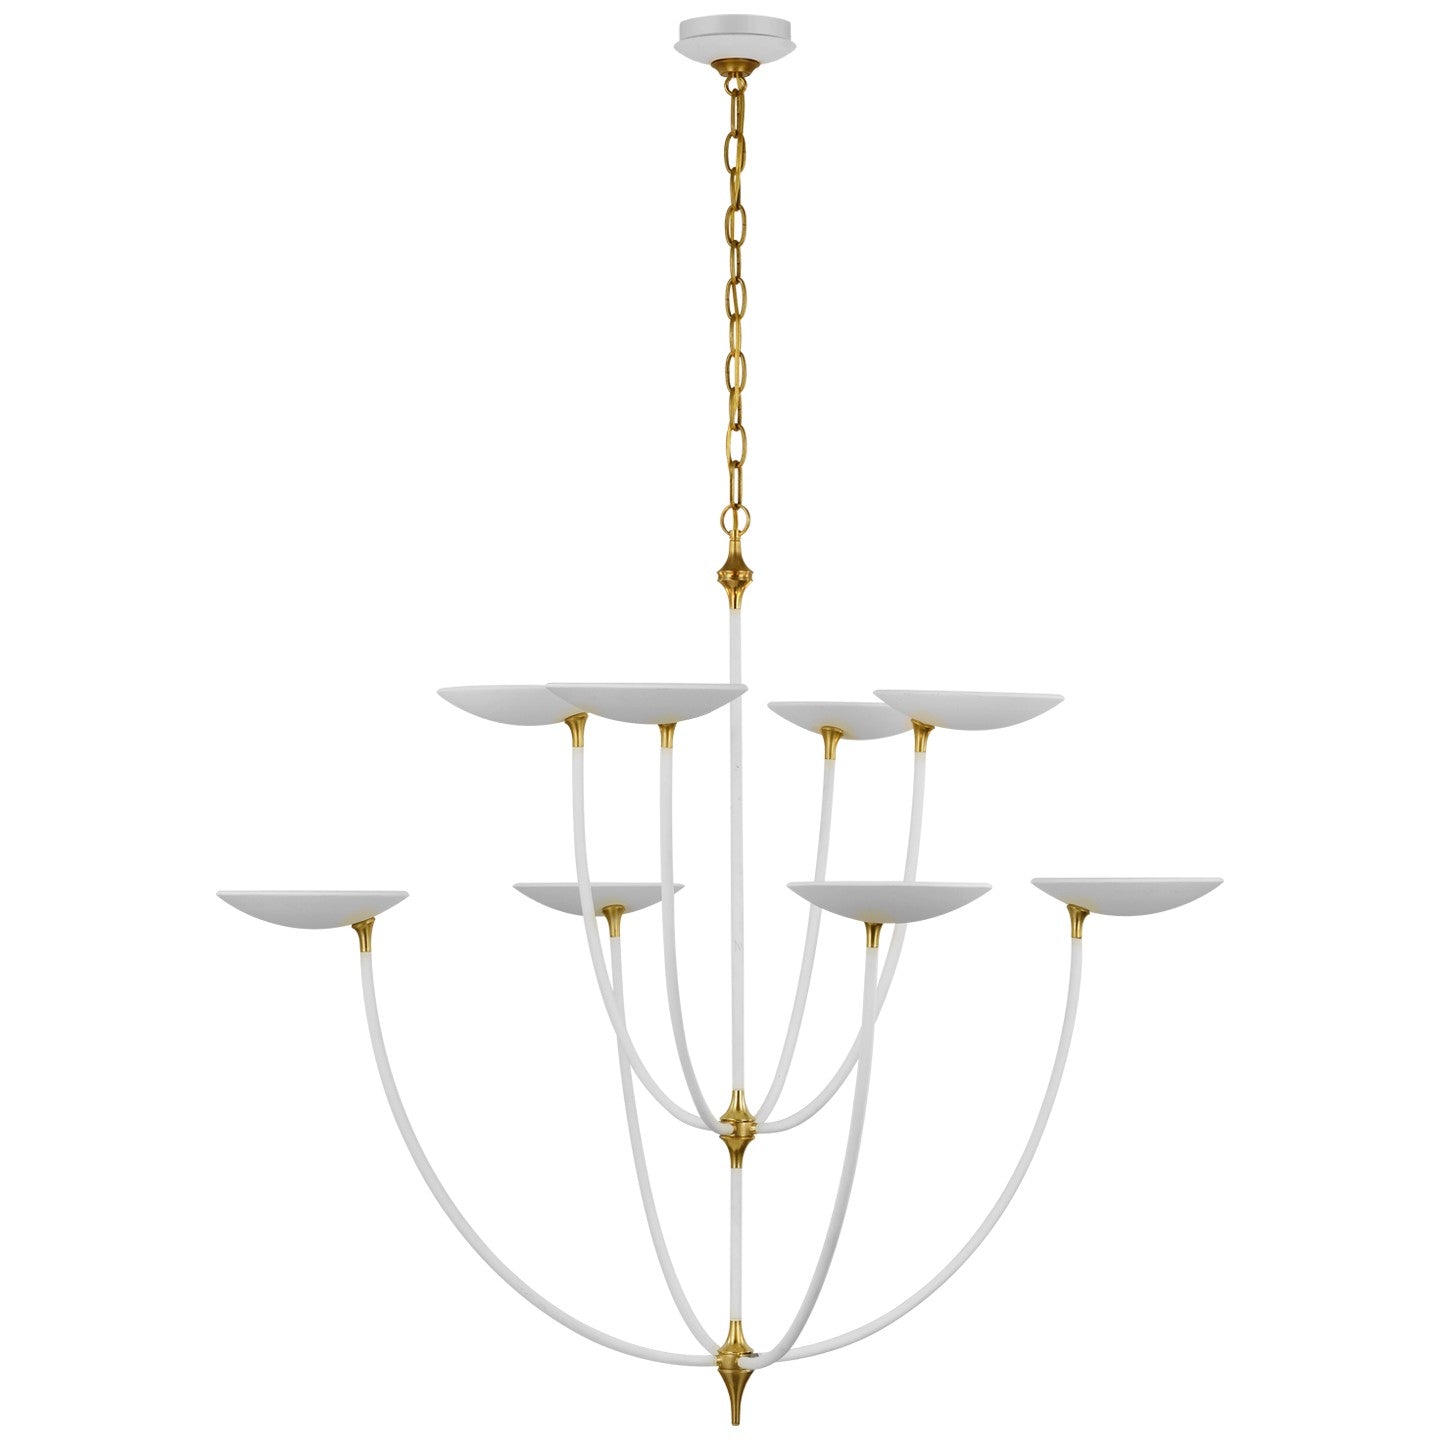 Visual Comfort Signature - TOB 5785WHT/HAB - LED Chandelier - Keira - Matte White and Hand-Rubbed Antique Brass